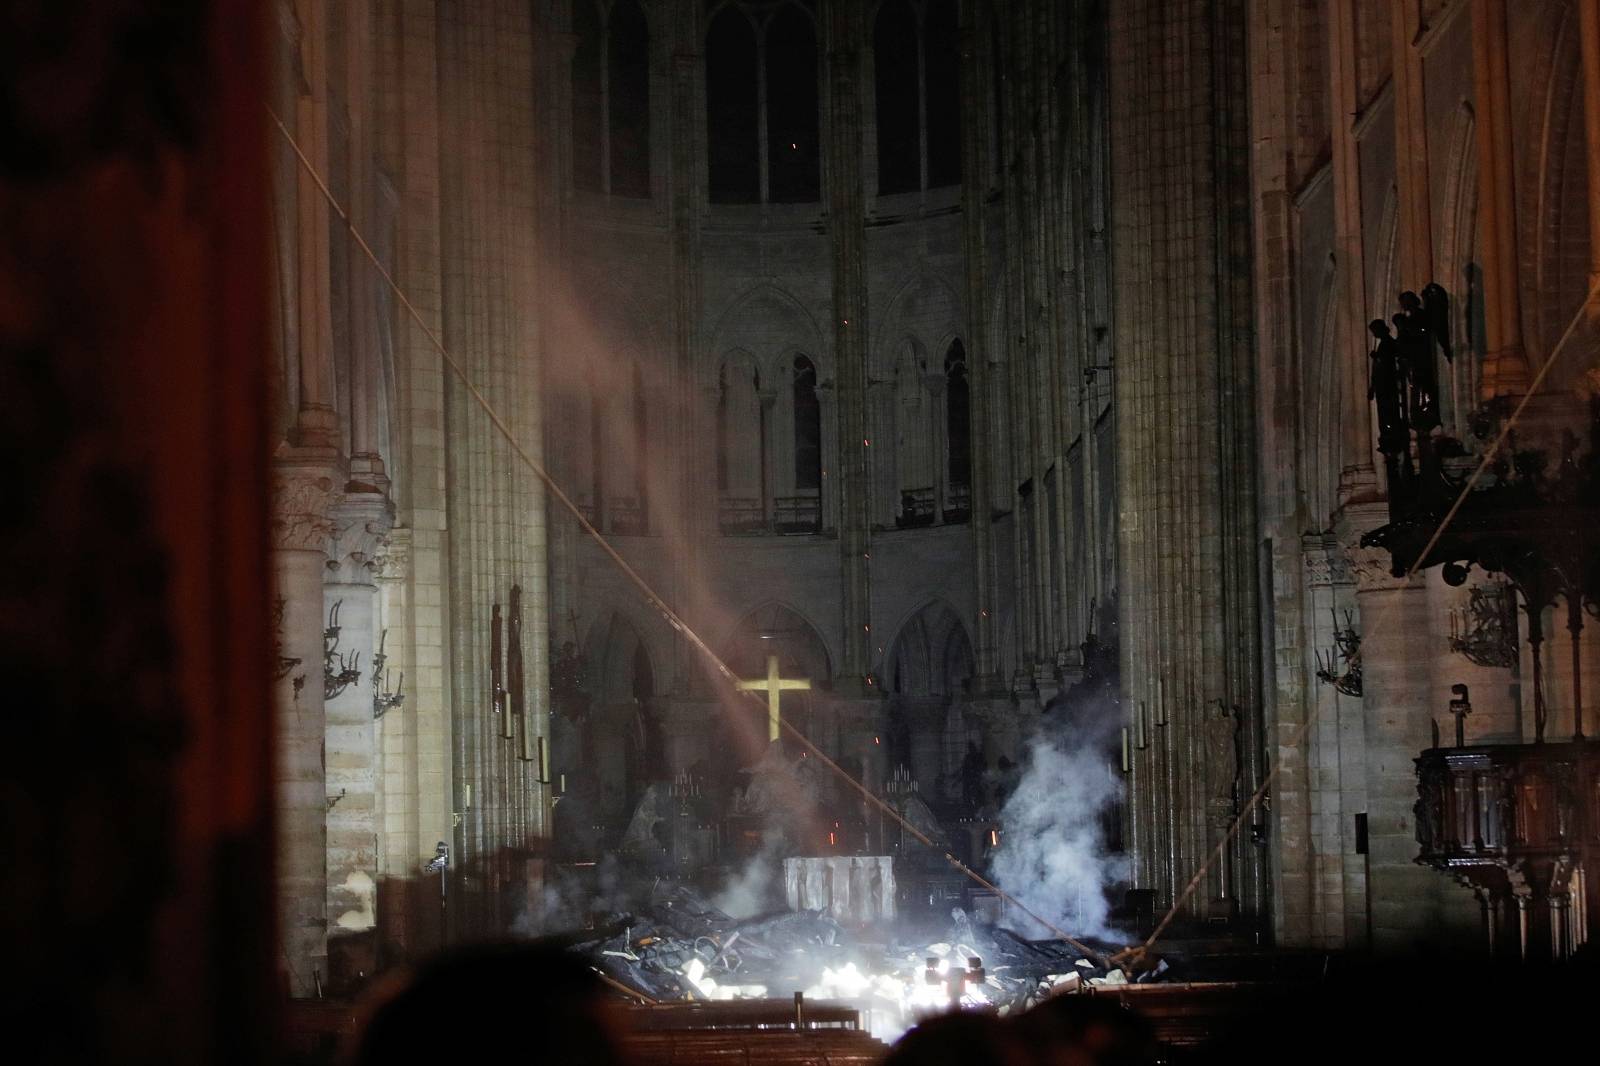 Smoke rises around the altar in front of the cross inside the Notre Dame Cathedral as a fire continues to burn in Paris